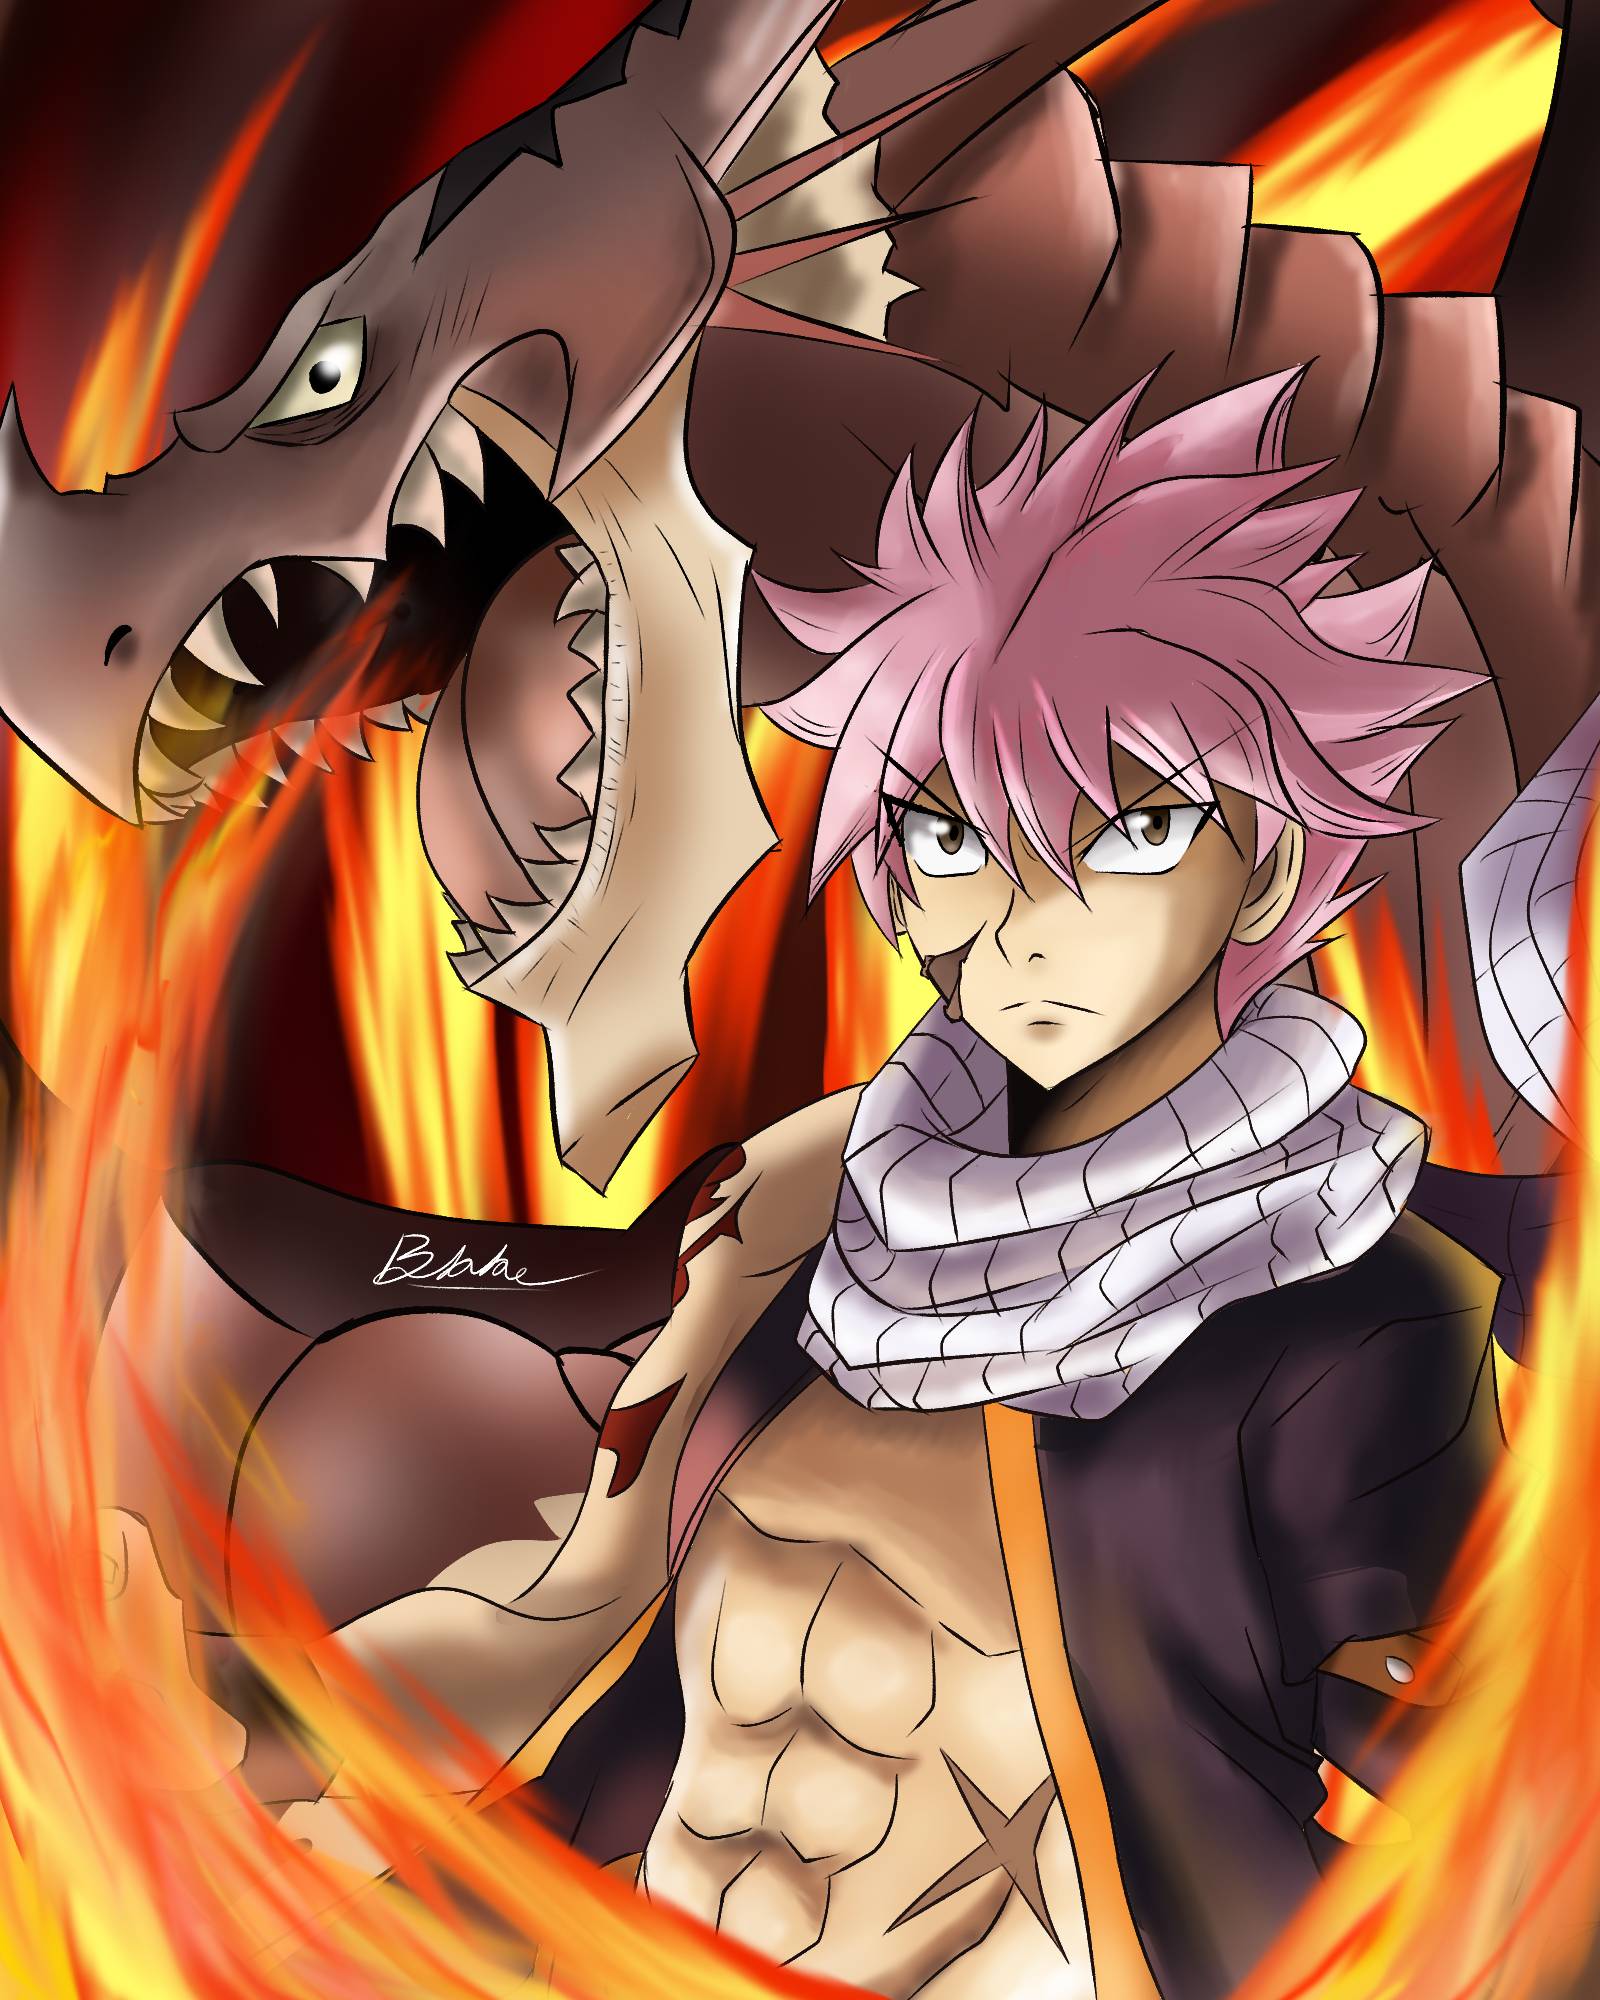 Fairy Tail : Etherious Natsu Dragnir by END7777 on DeviantArt